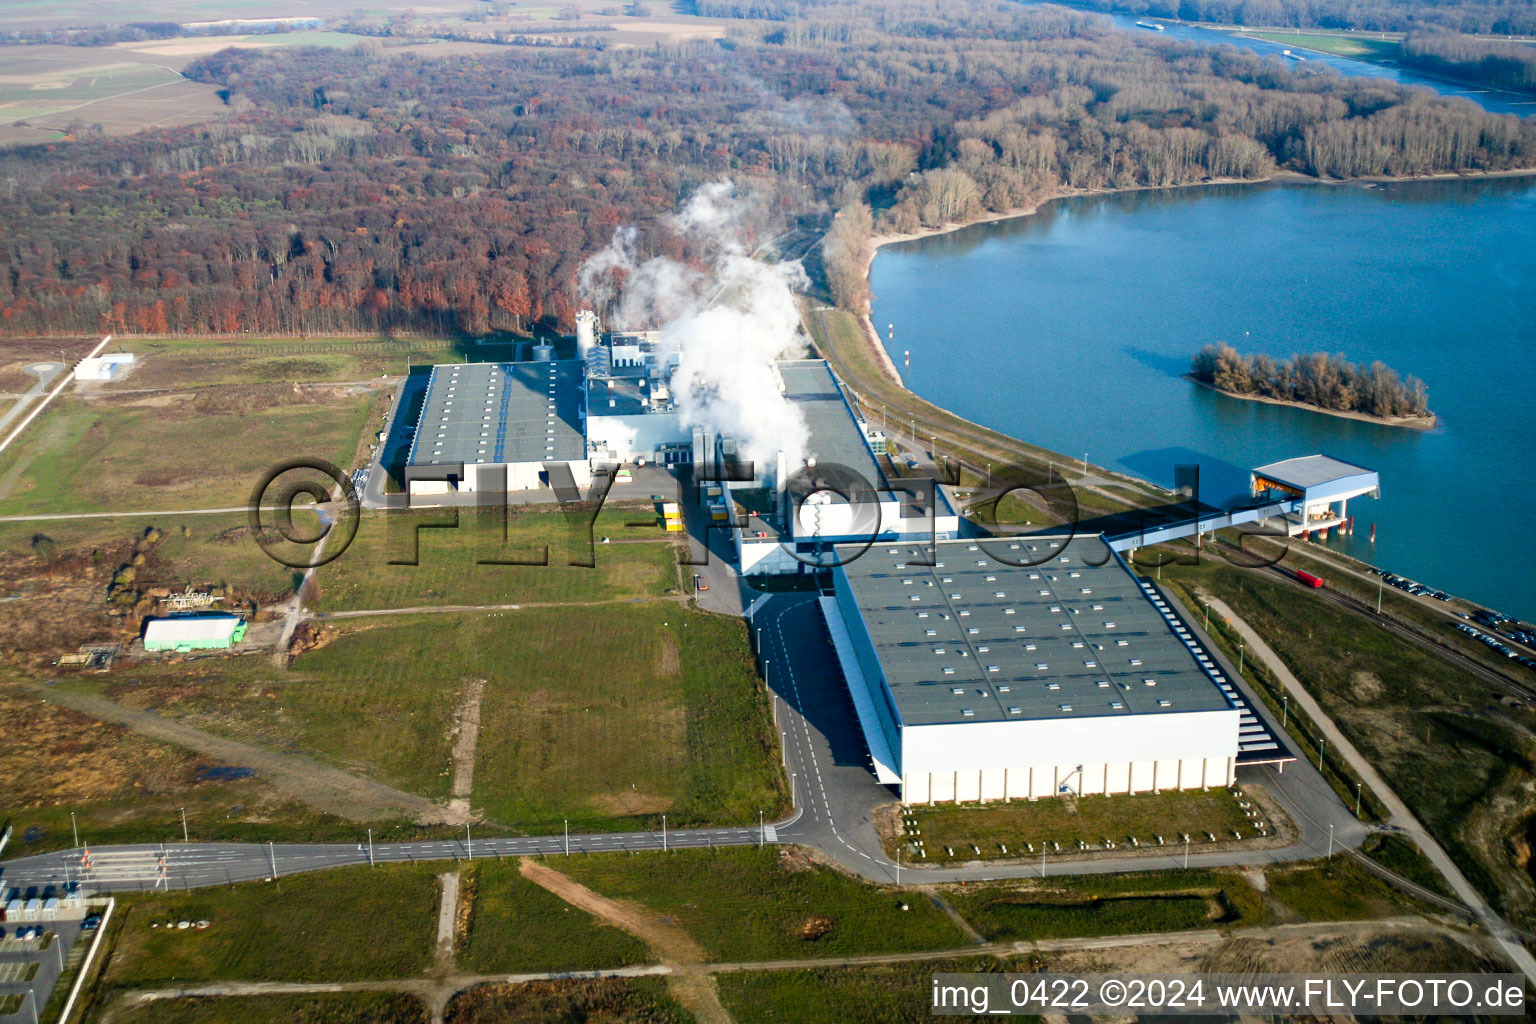 Aerial photograpy of Palm paper factory in the Oberwald industrial area in Wörth am Rhein in the state Rhineland-Palatinate, Germany